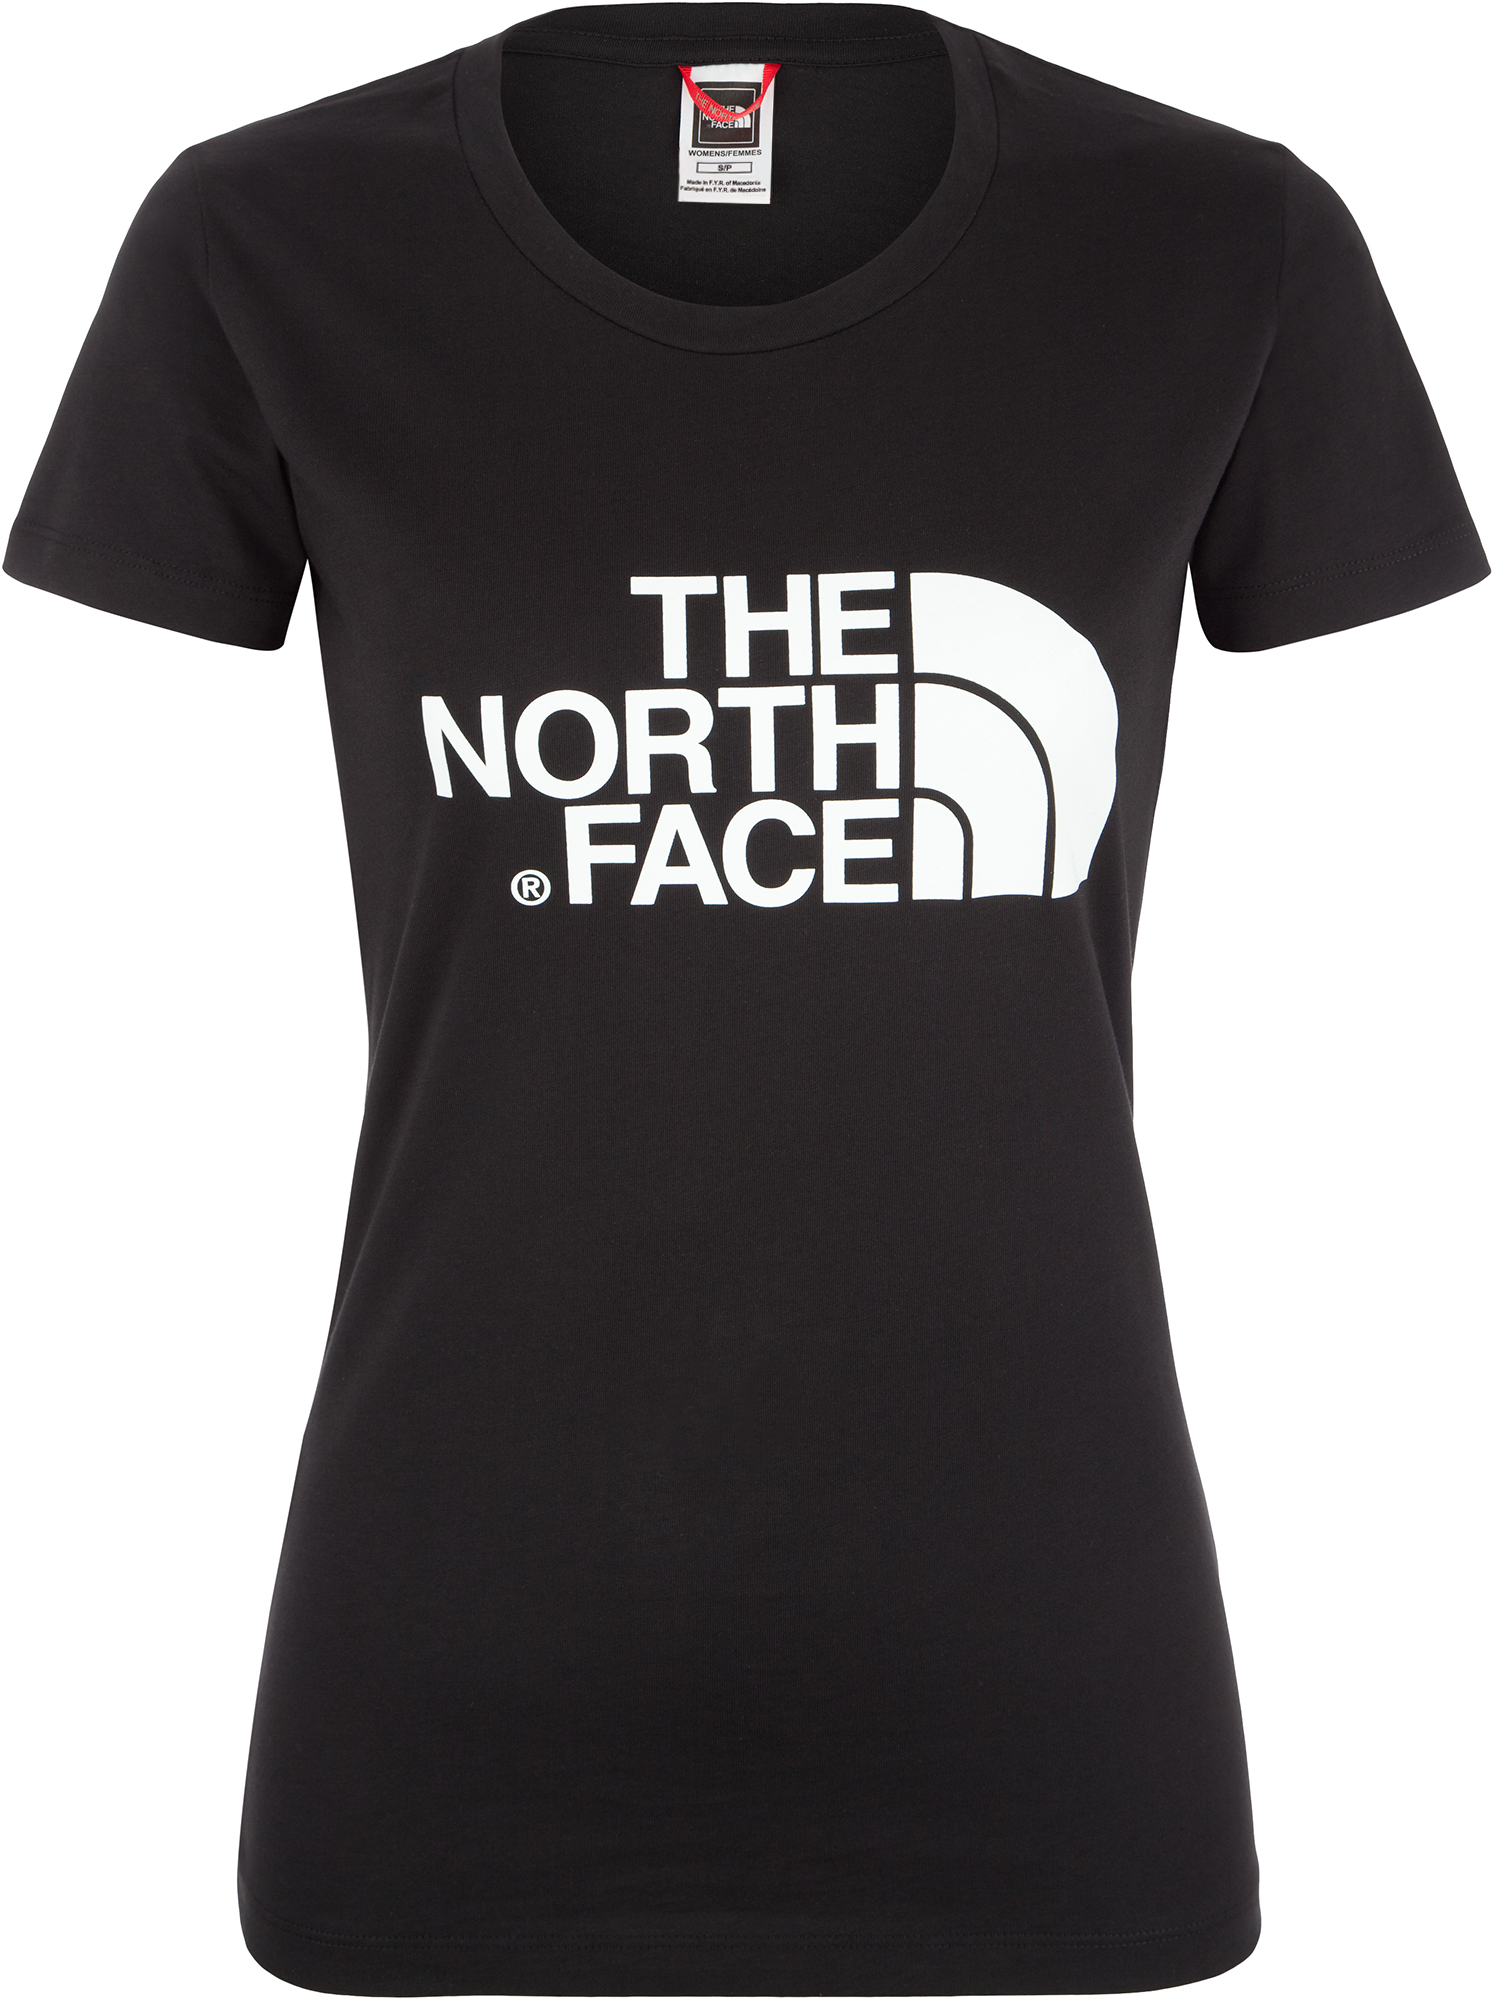 The North Face Футболка женская The North Face Easy, размер 50